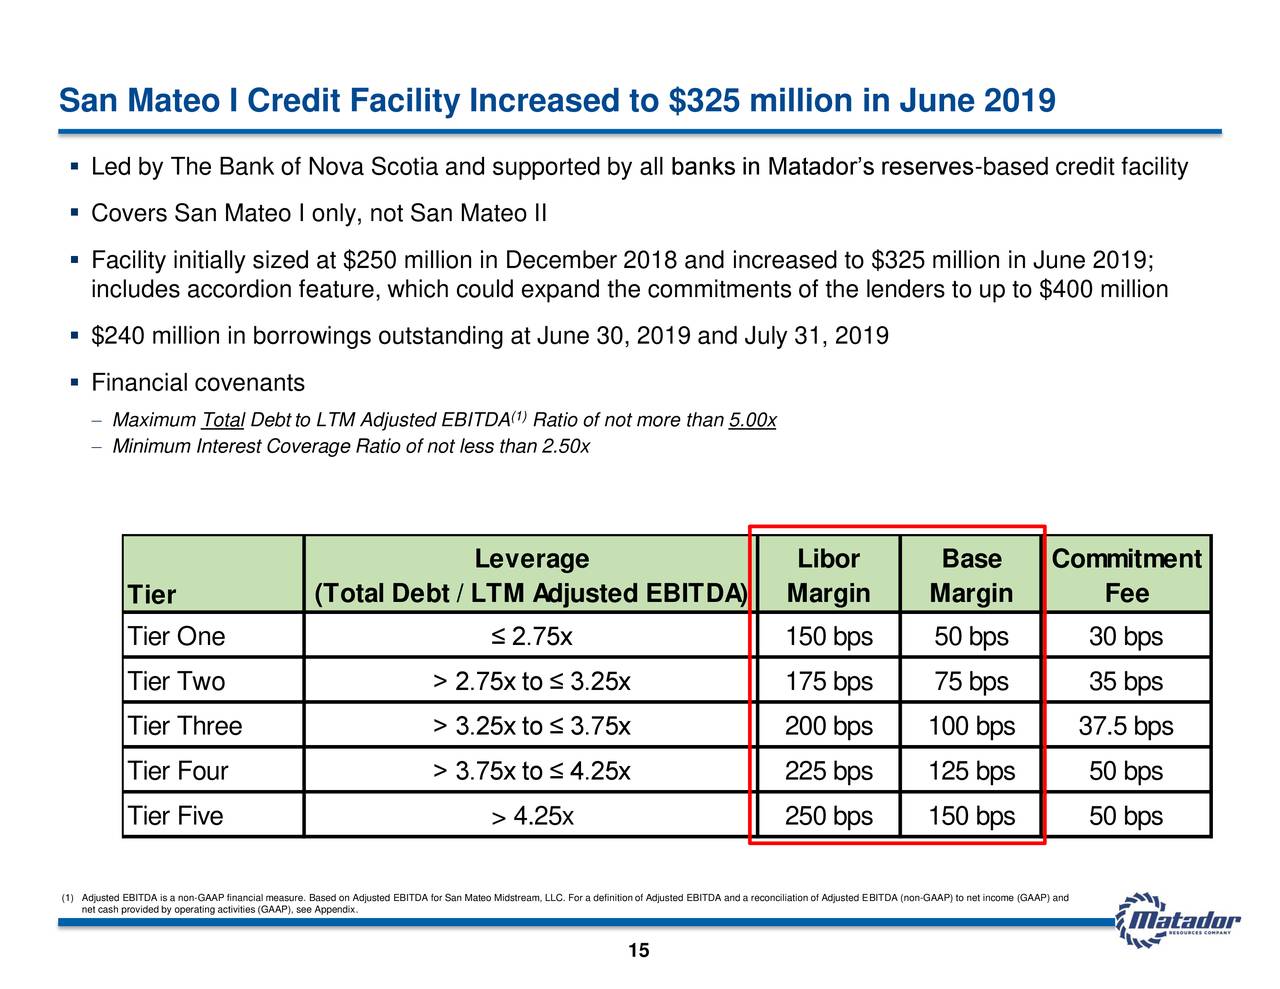 San Mateo I Credit Facility Increased to $325 million in June 2019